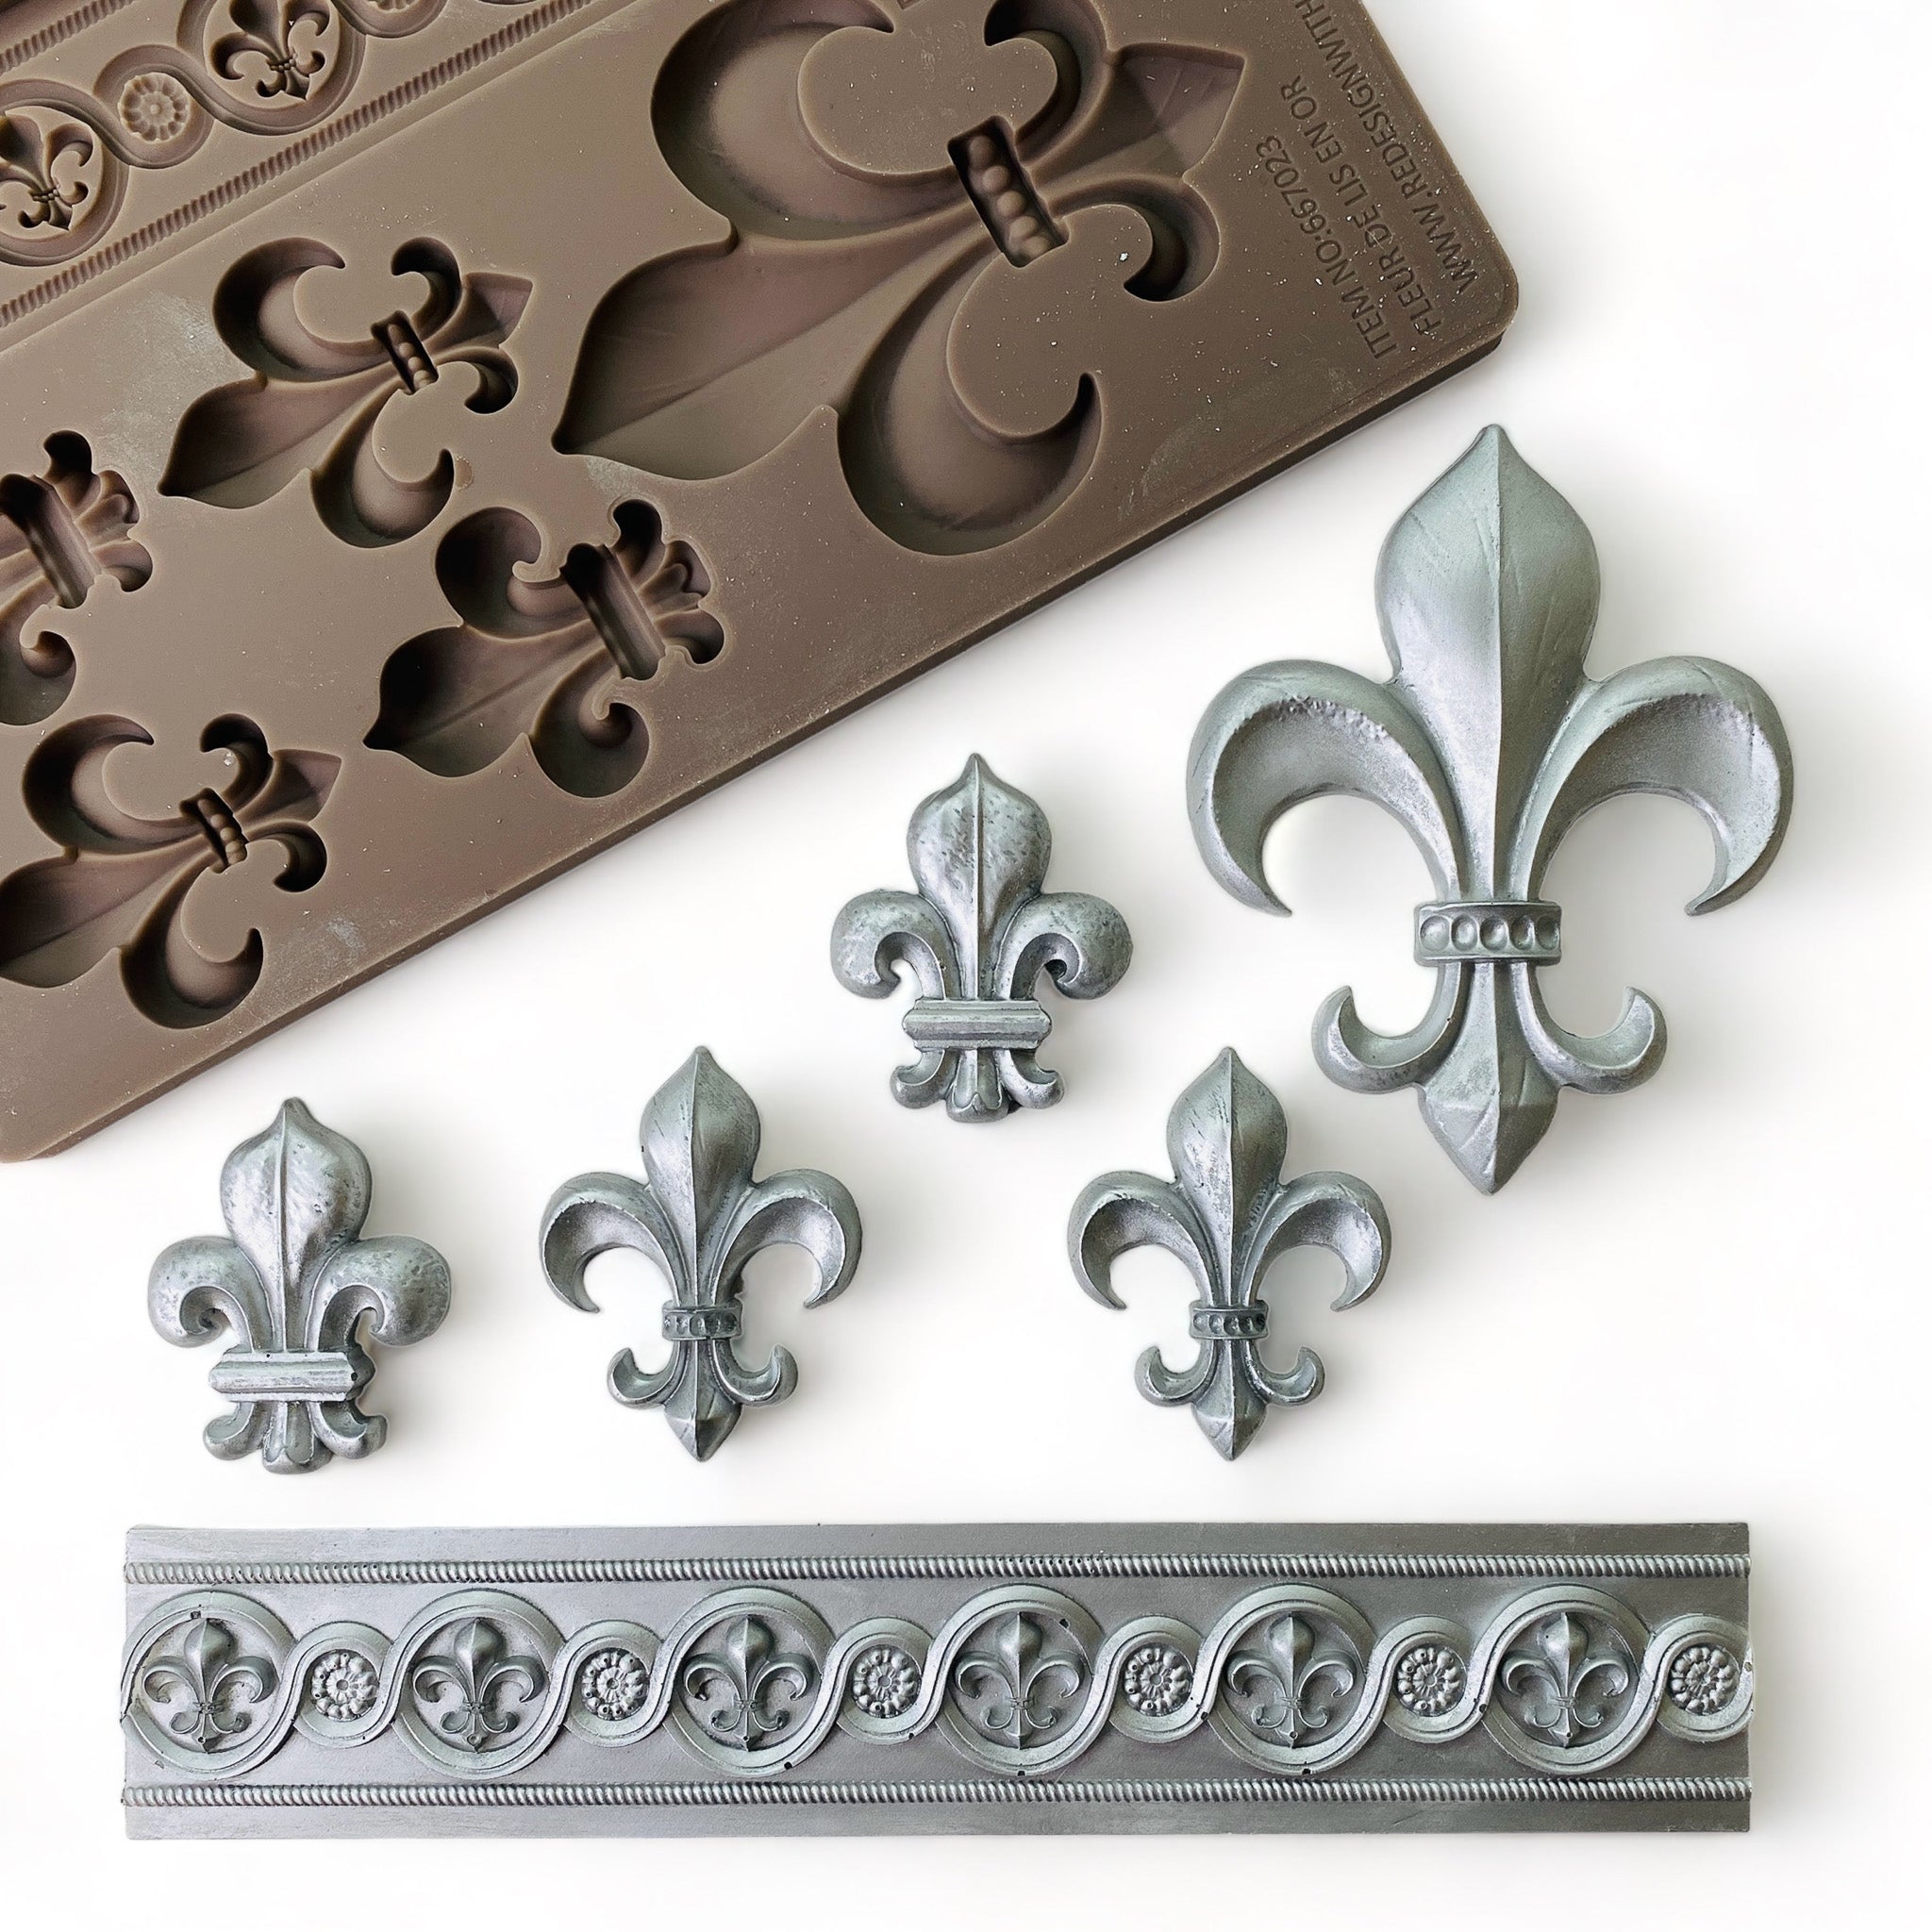 A brown silicone mould and its silver colored castings of 5 fleur de lis and a fleur de lis border are against a white background.